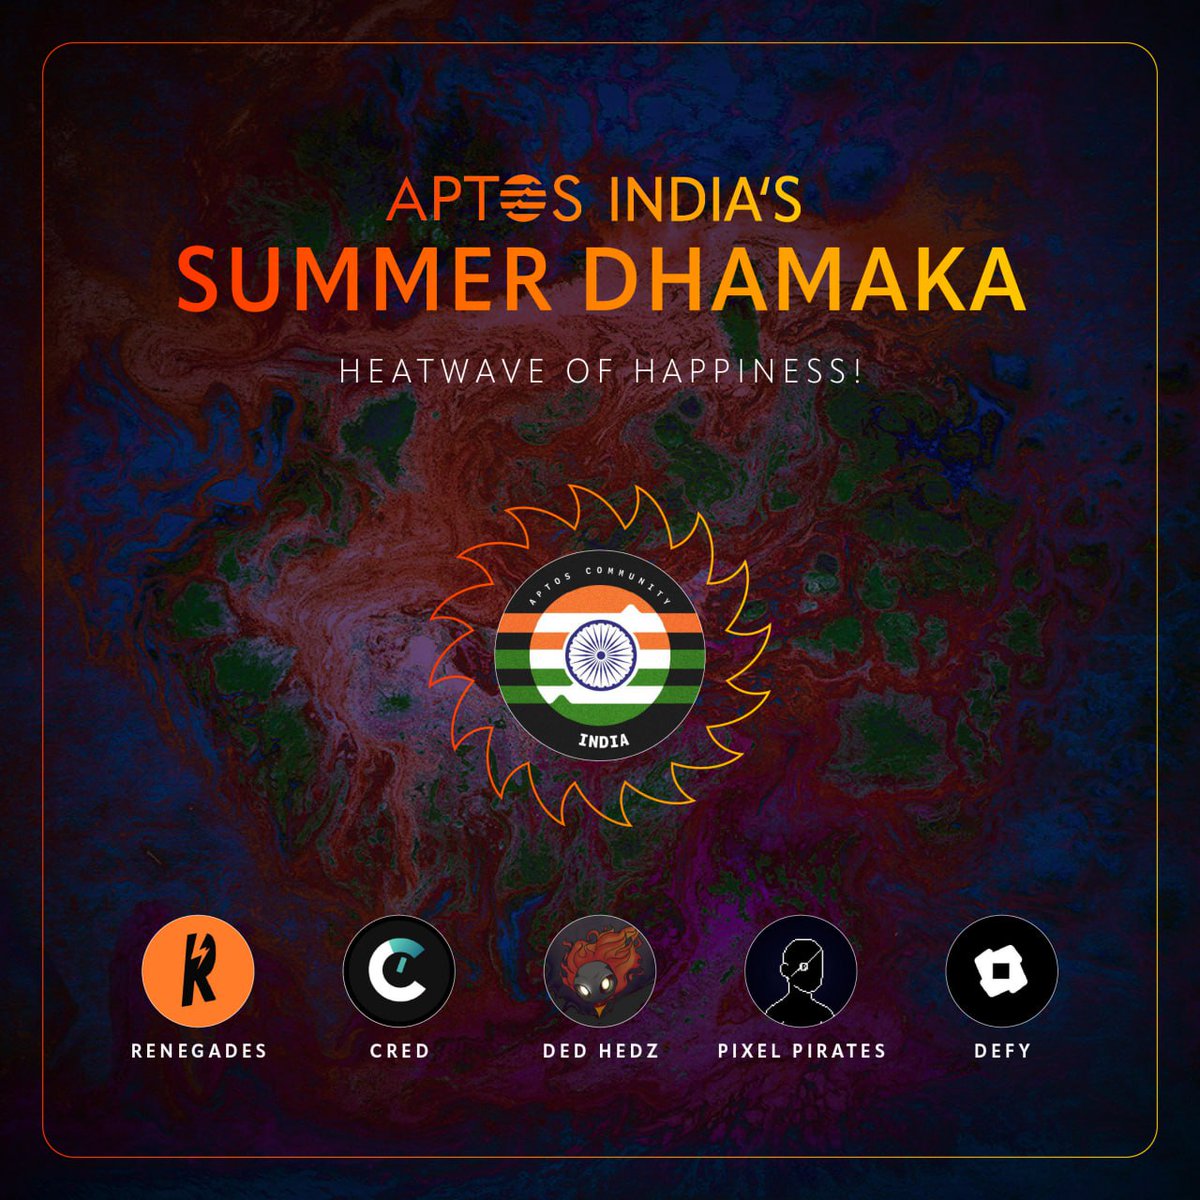 ☀️ The Aptos India's Summer Dhamaka is HERE! ☀️ Aptos India’s Summer Dhamaka brings you cool opportunities from the #Aptos ecosystem projects. The beauty of this campaign is EVERYONE is WINNER!! ✅Participate in the Galxe campaign at app.galxe.com/quest/aptos/GC… Rewards from the…